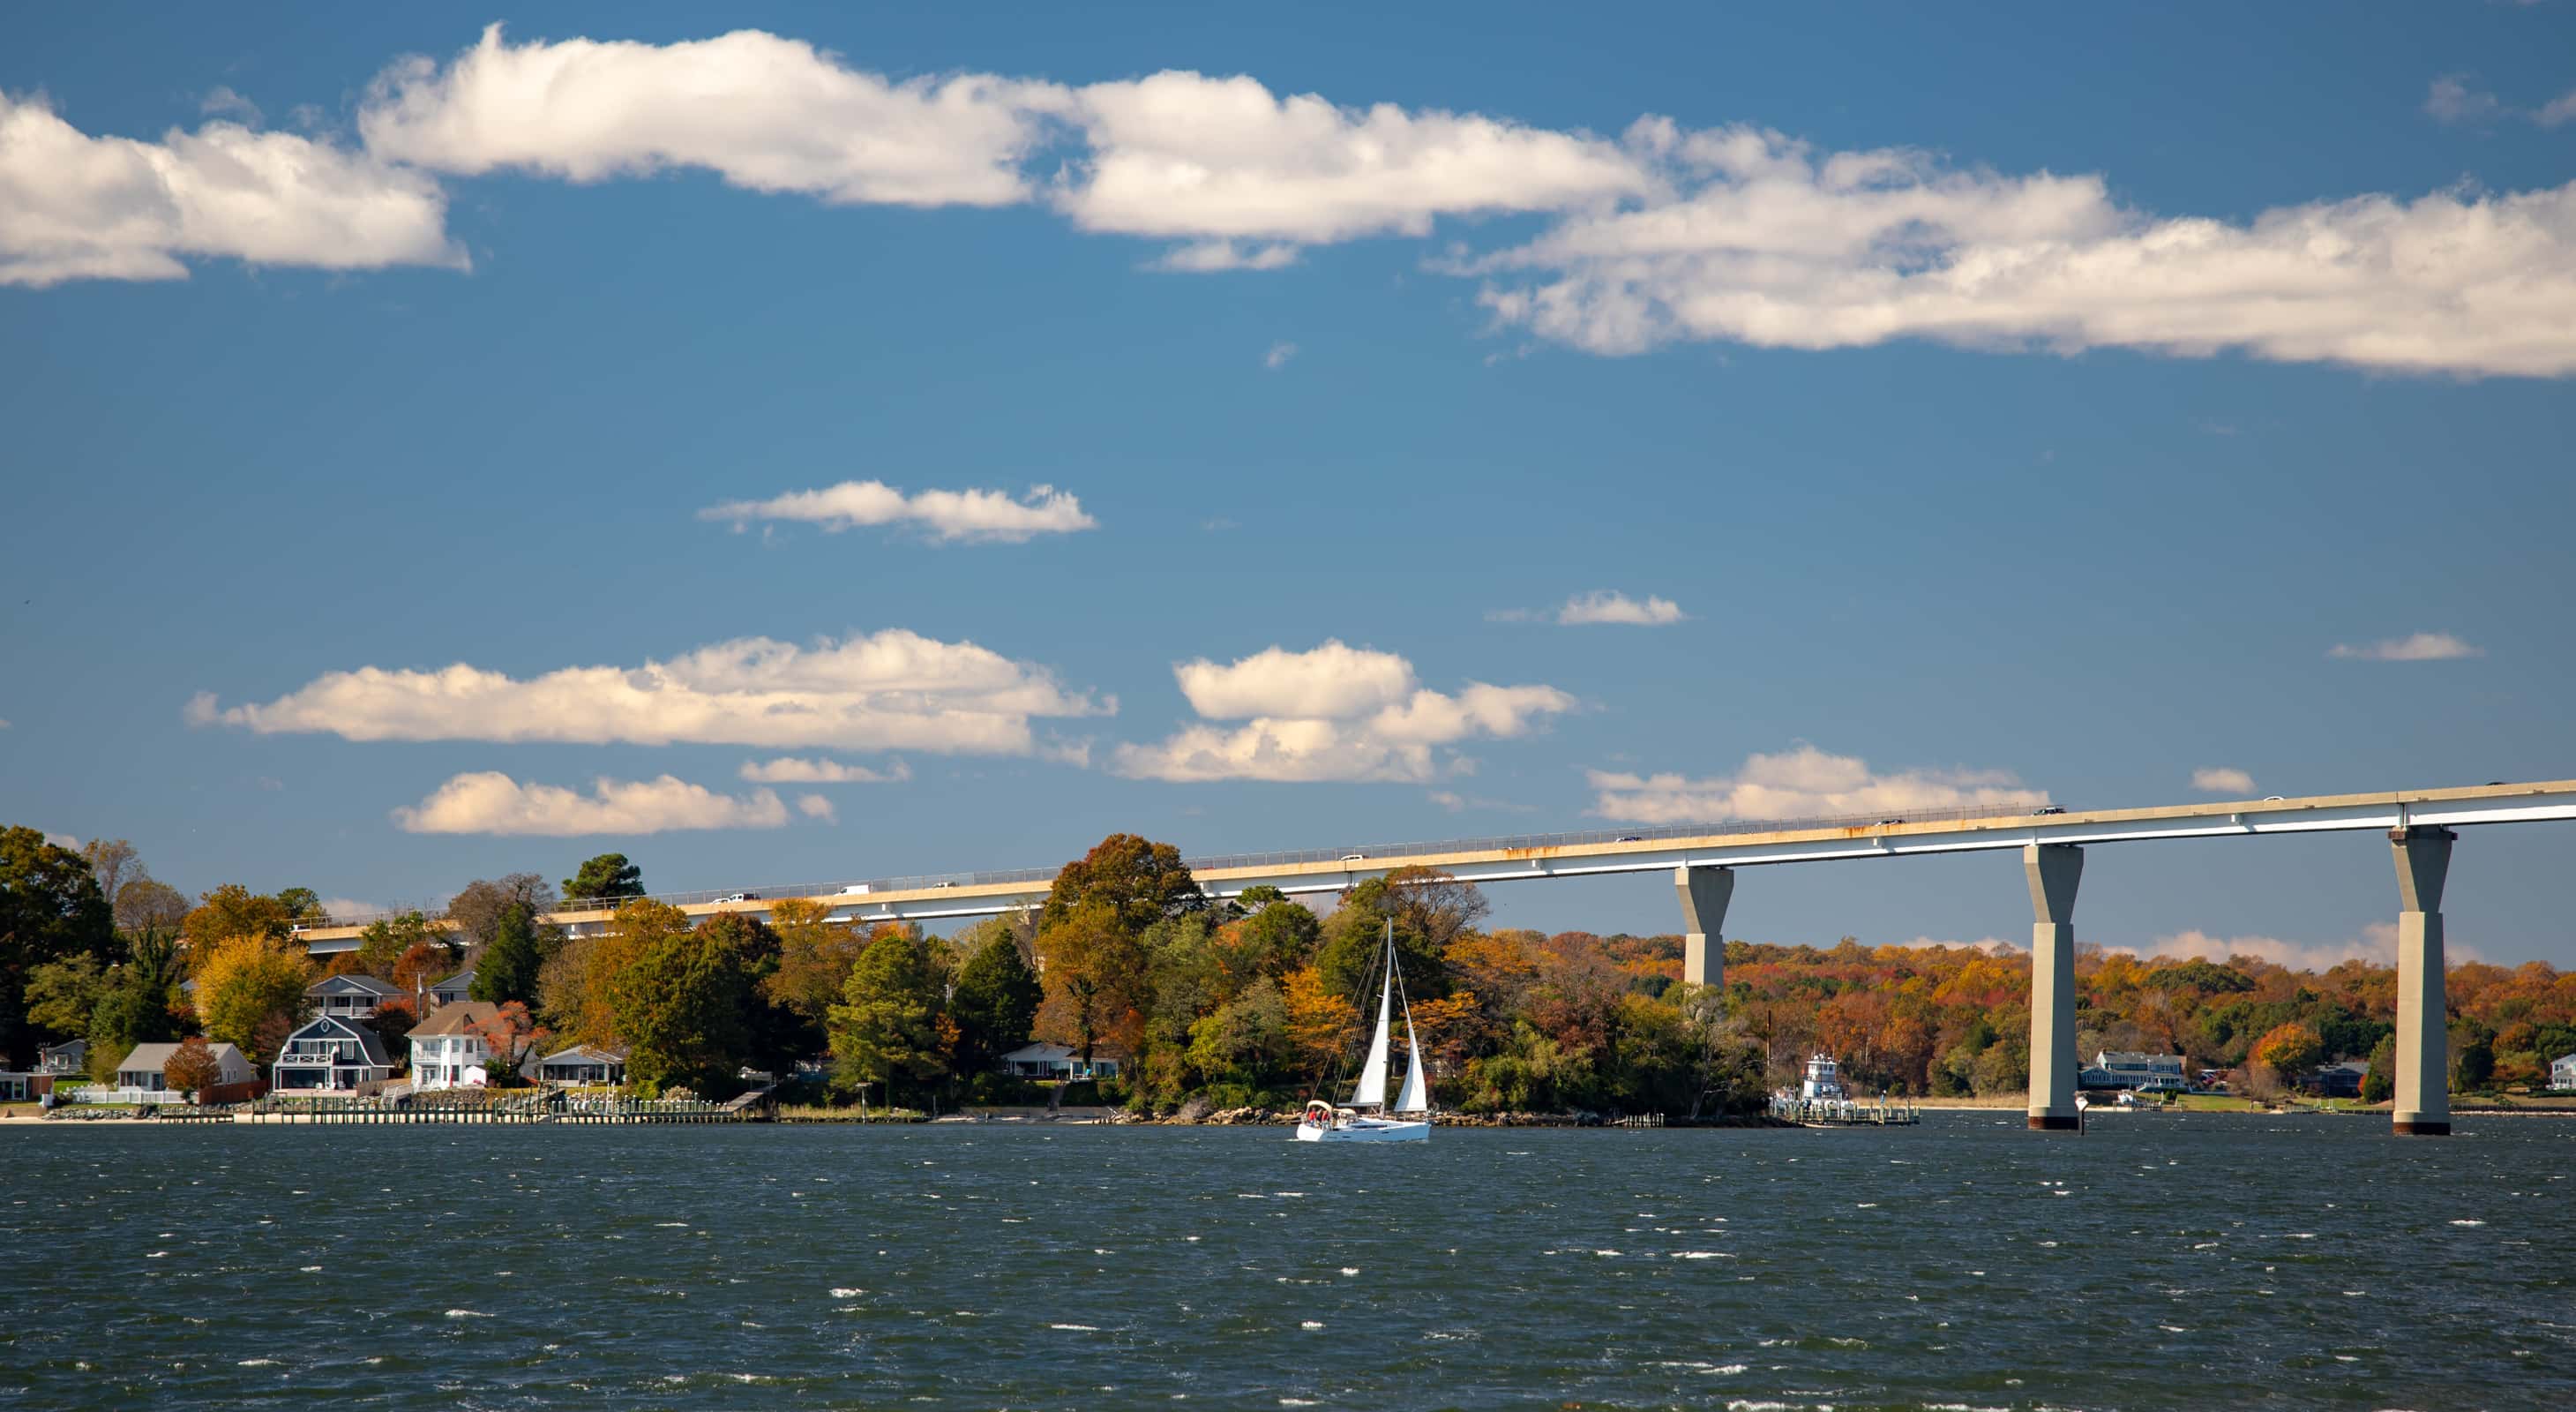 Scenic autumn view from Solomons Island where the Chesapeake Bay meets the Patuxent River in Southern Maryland USA